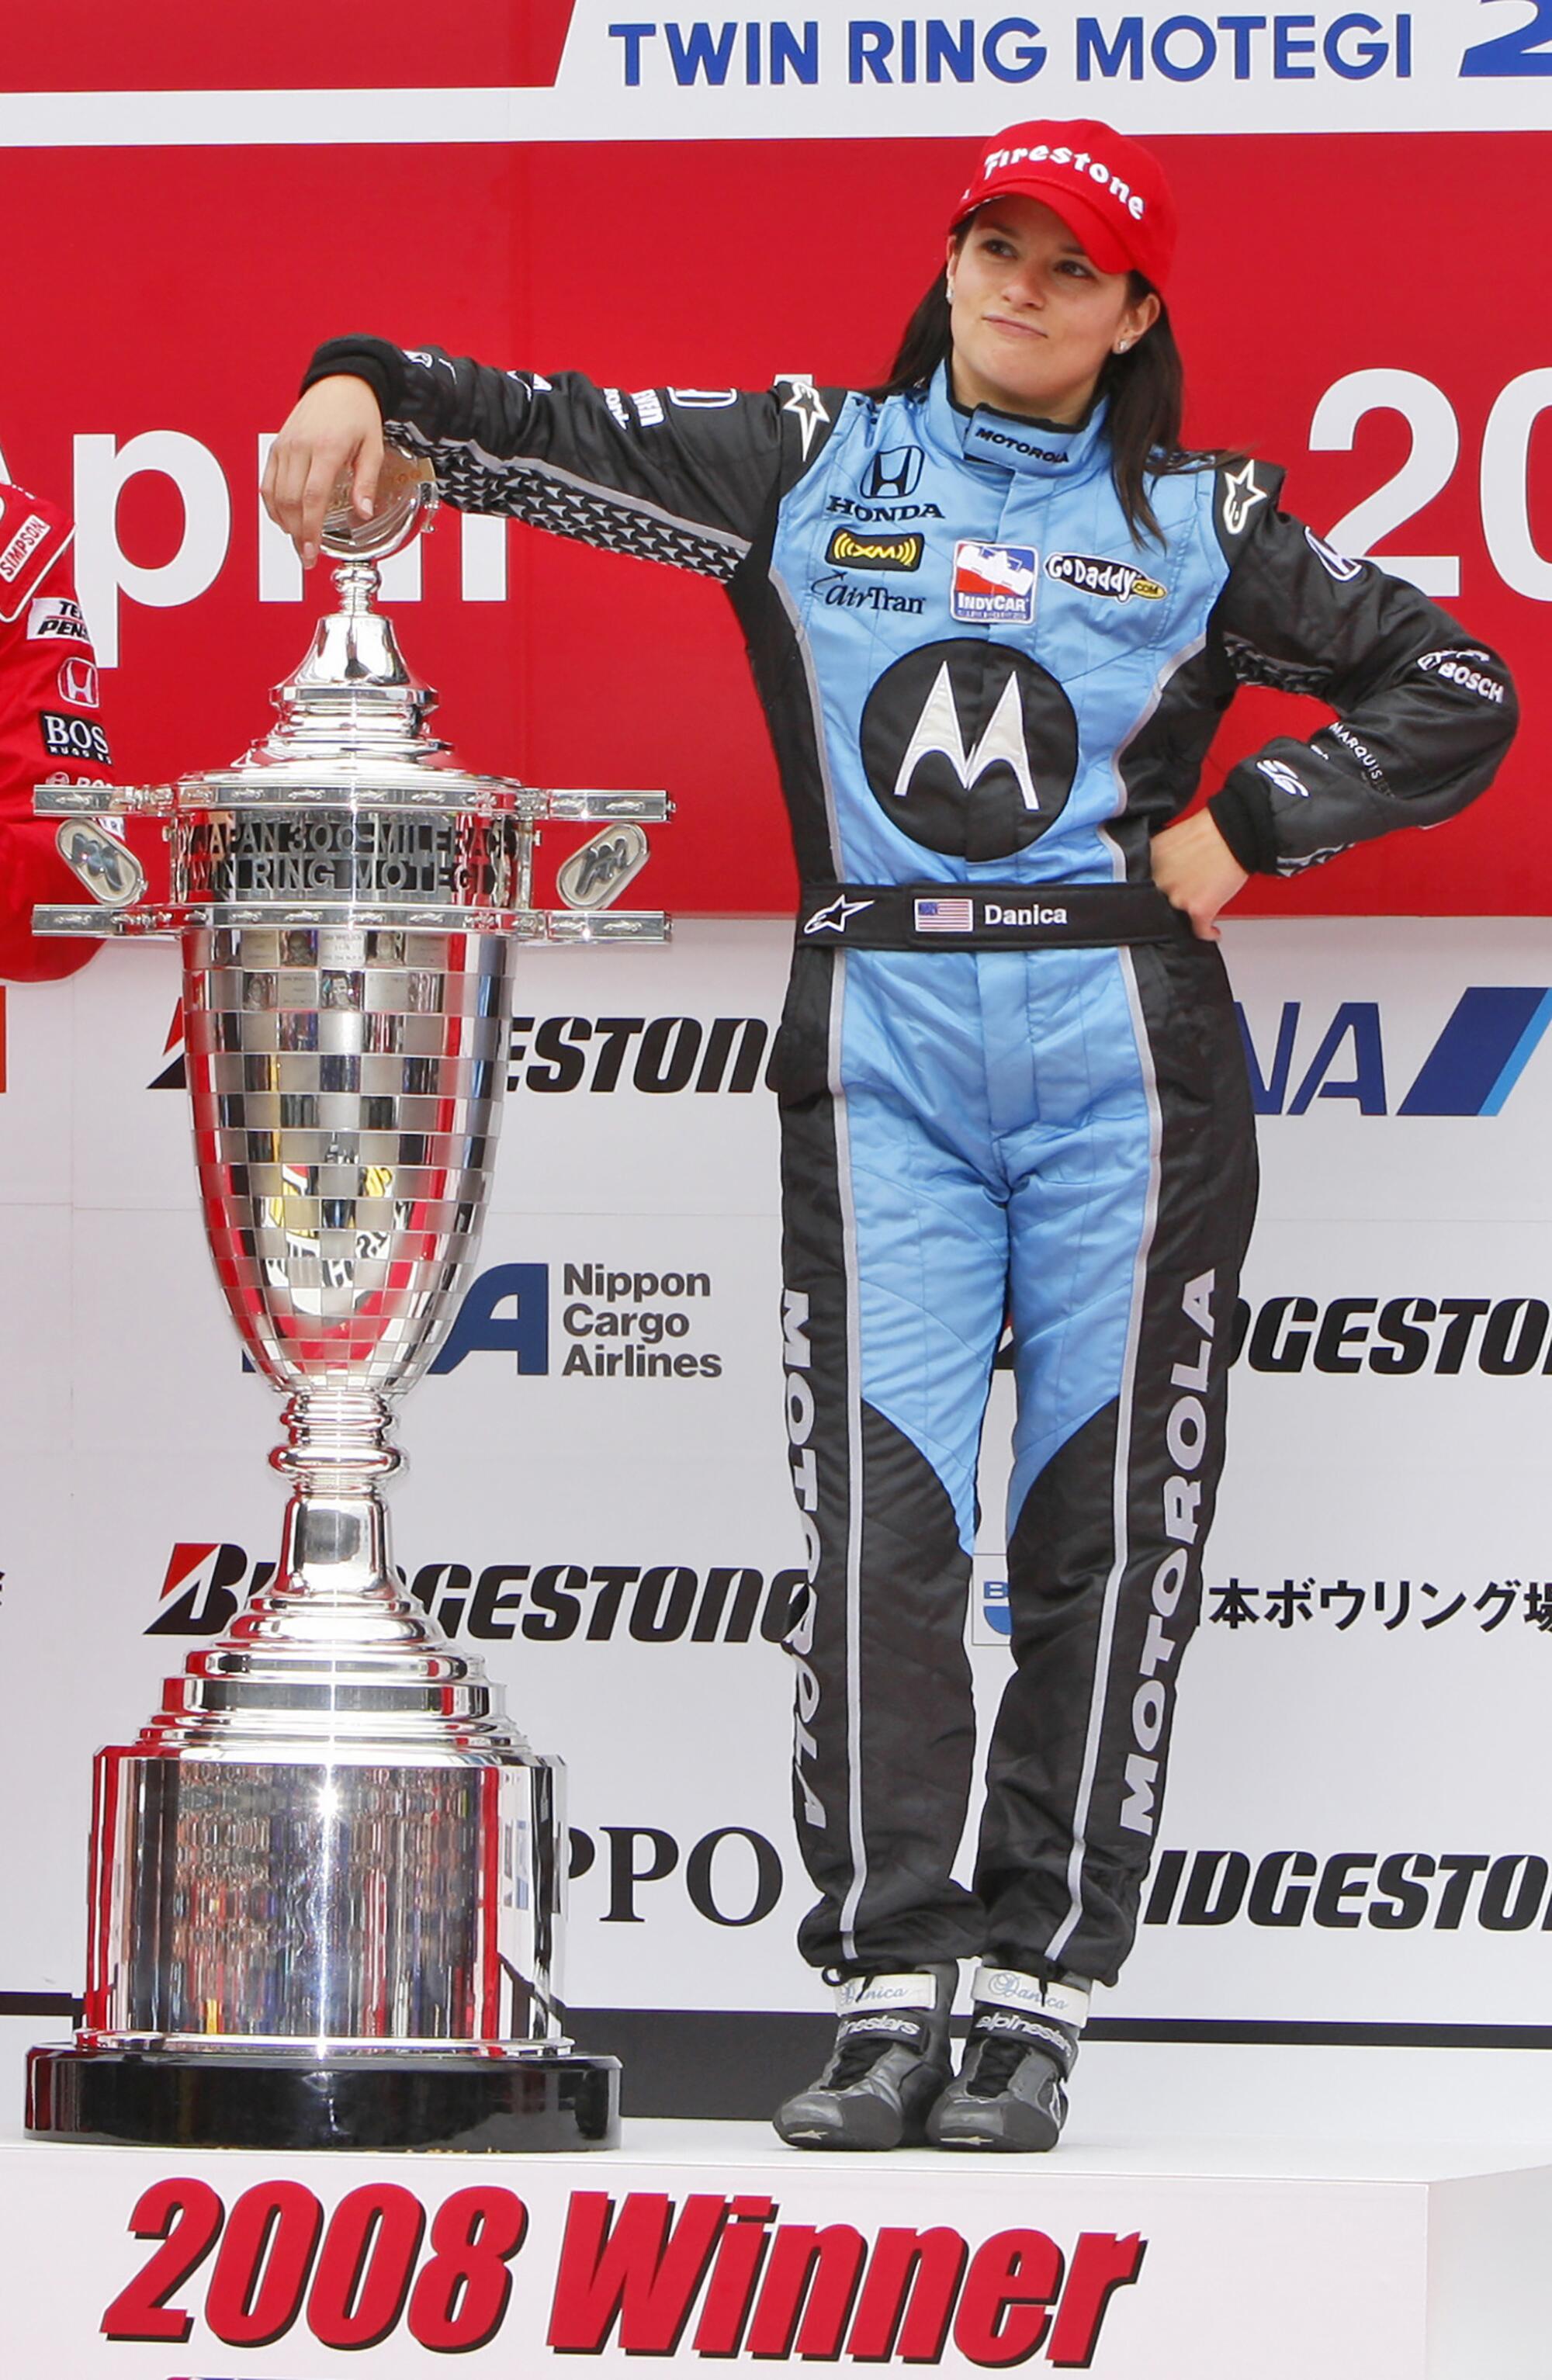 Danica Patrick poses on the podium after winning the Indy Japan 300 at Twin Ring Motegi in April 2008.